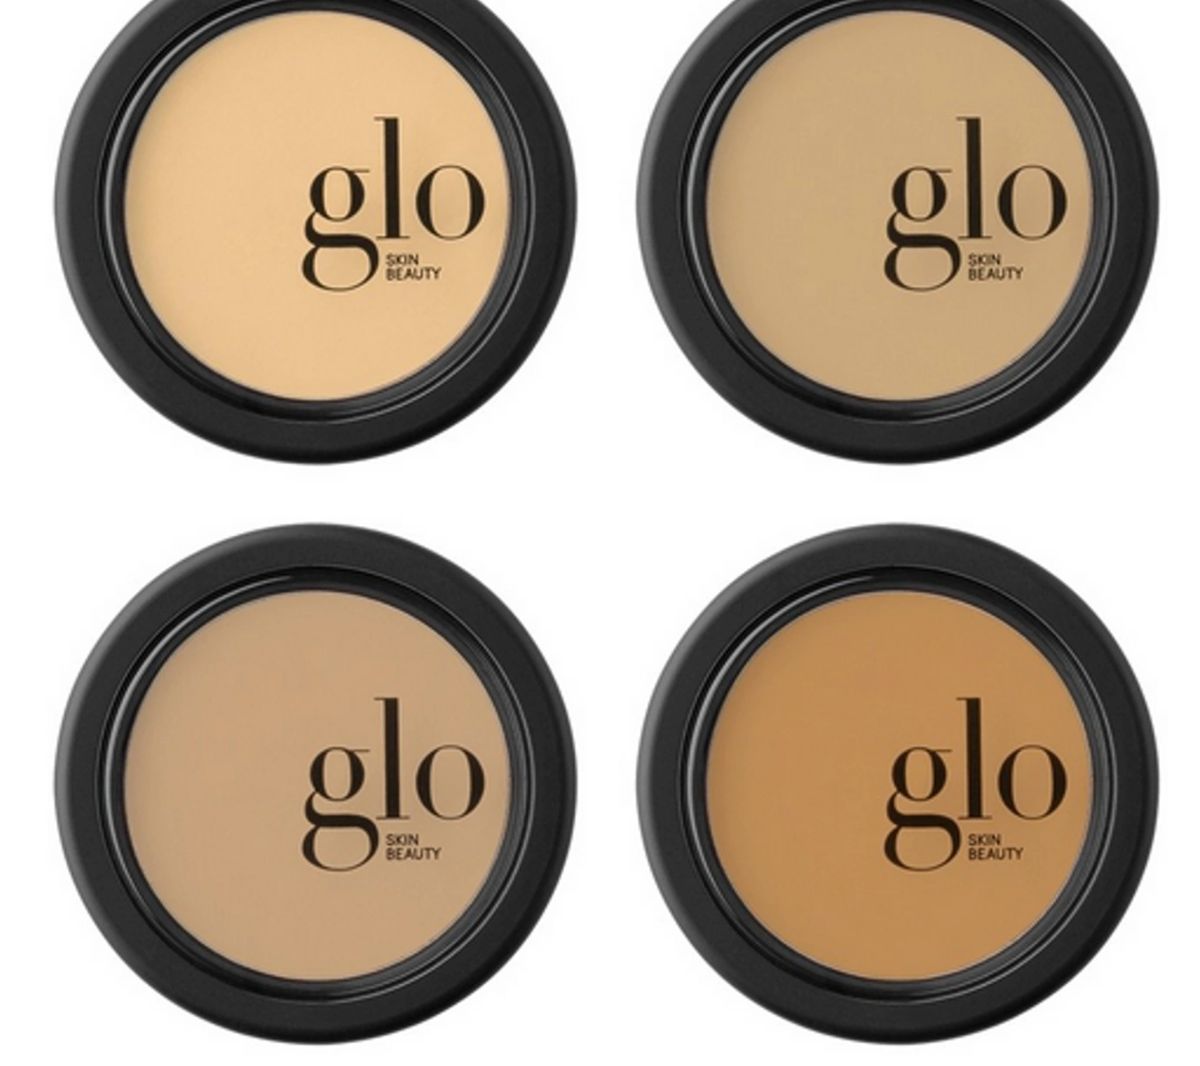 Oil Free Camouflage Concealer Glo Skin Beauty (Color: Tawny)